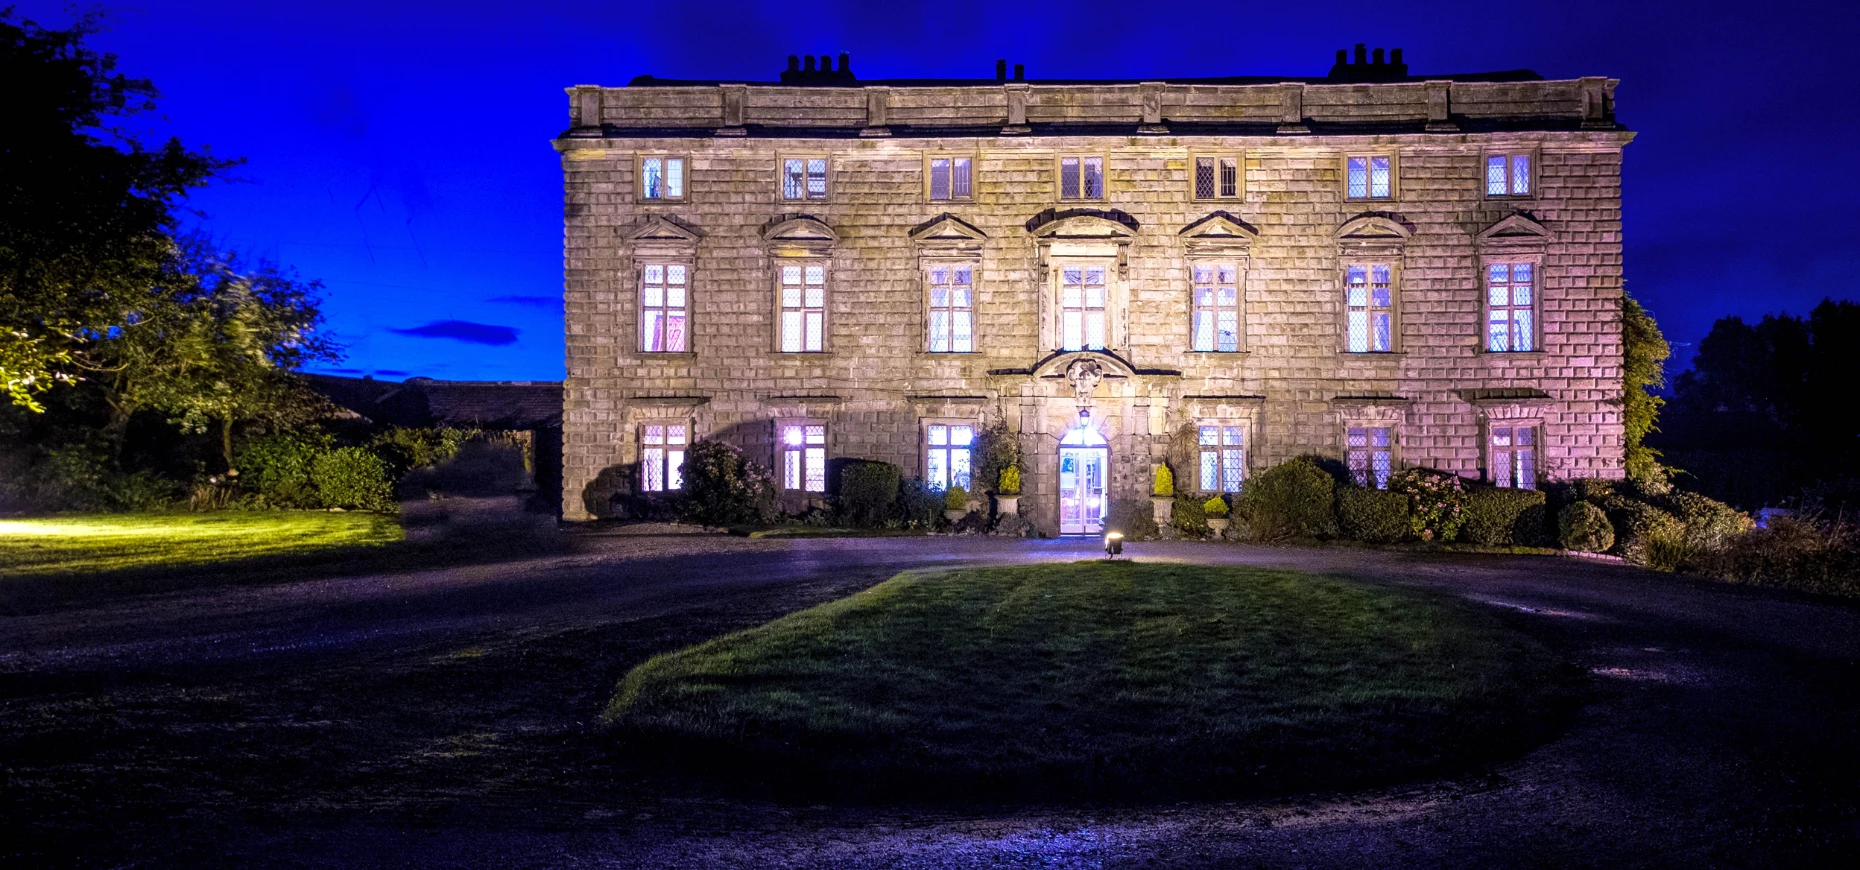 A night-time exterior shot of the Cumbrian manor house, Moresby Hall.